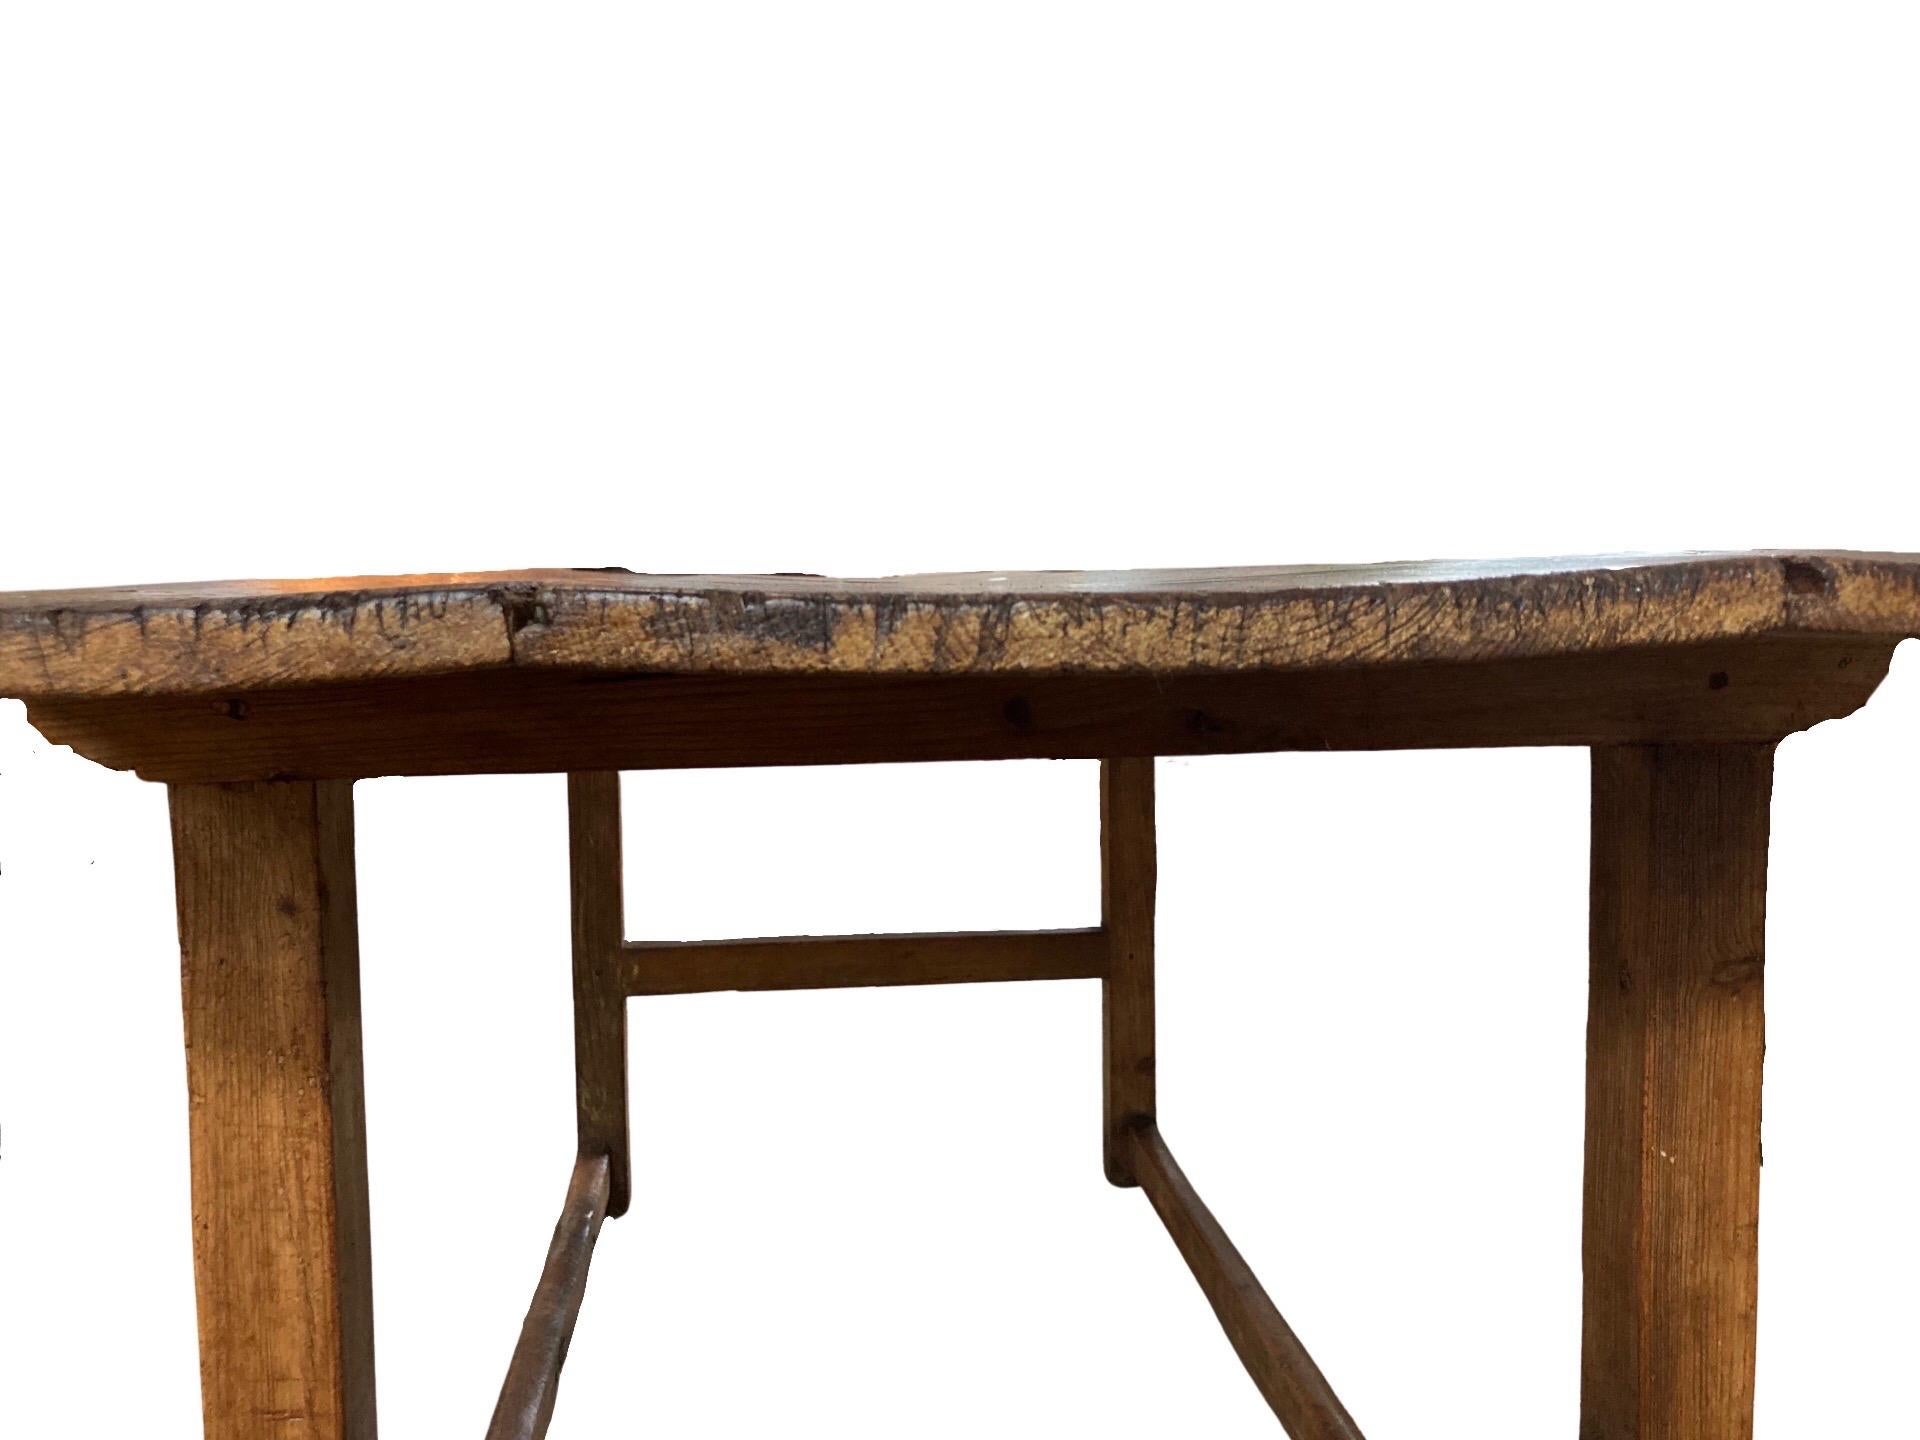 Texas Spanish colonial table built in the late 1800s using long leaf pine. If you are looking for a piece of American history this is the table for you. We find ourselves lucky for finding this beauty because the heat of South Texas can be brutal on